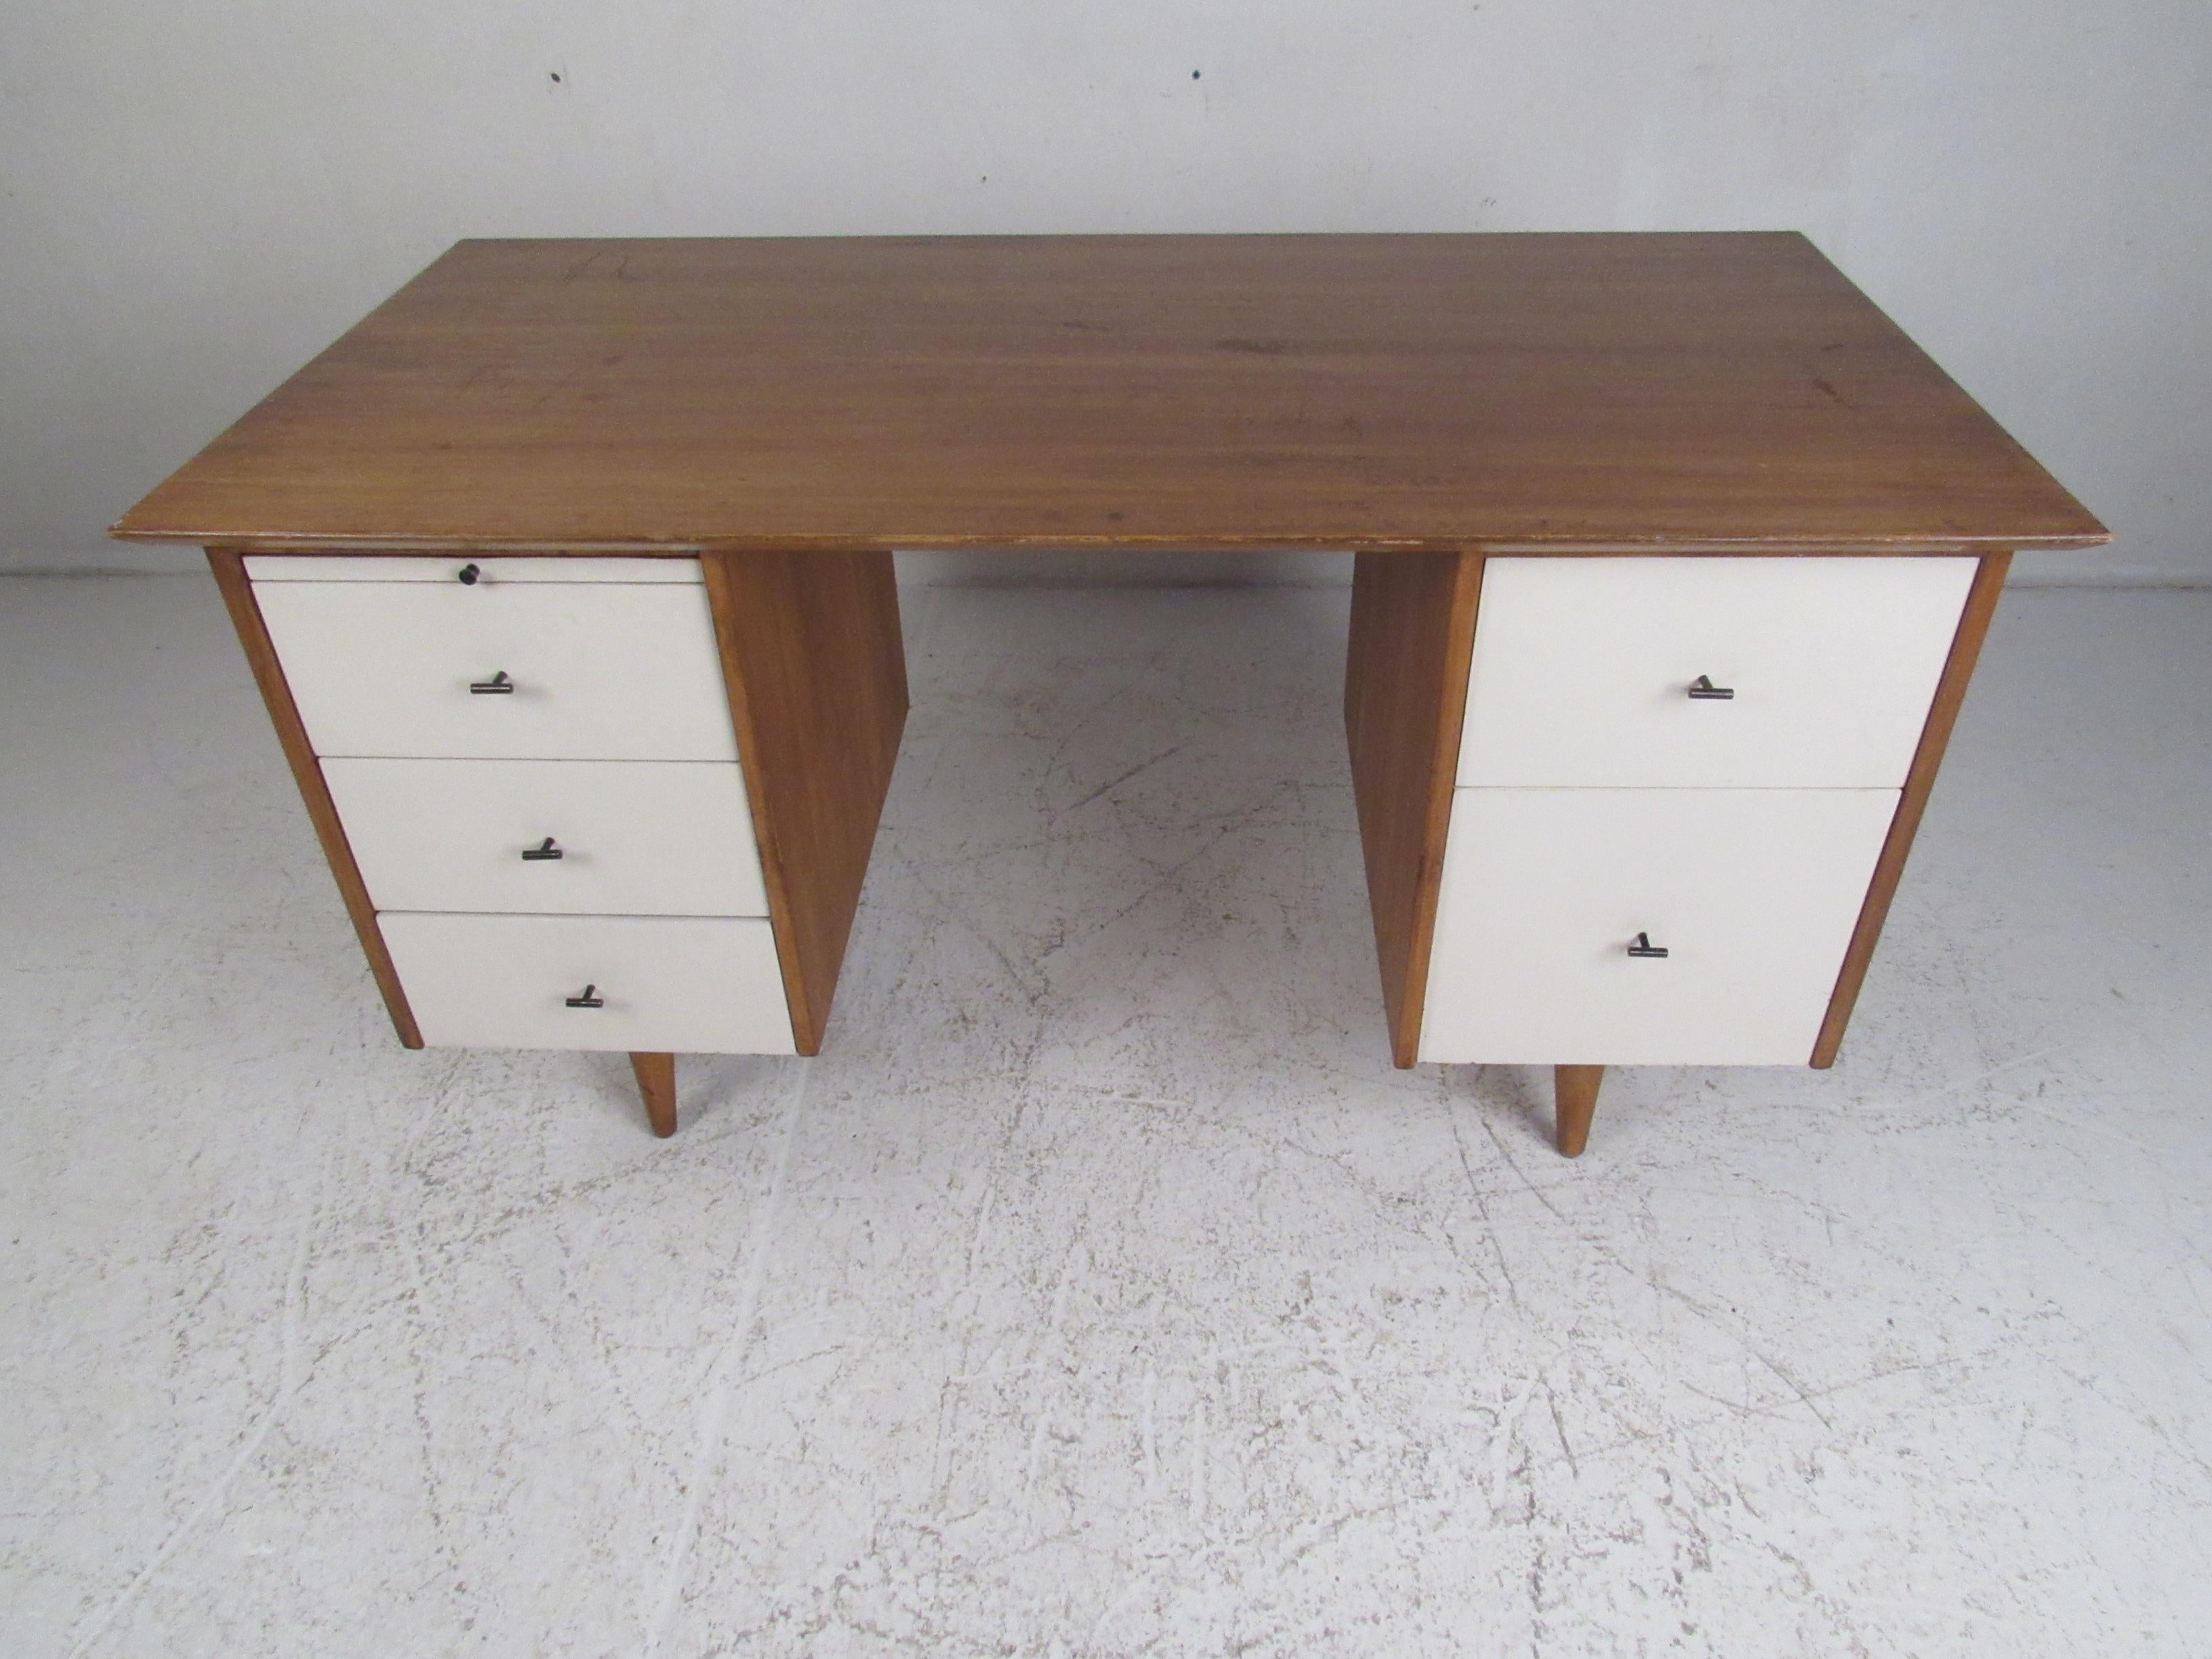 This stunning vintage modern desk boasts a large top ensuring plenty of workspace and five hefty drawers for ample storage. A unique design by Paul McCobb for planners group with white painted drawer fronts, unusual metal pulls, and tapered legs.